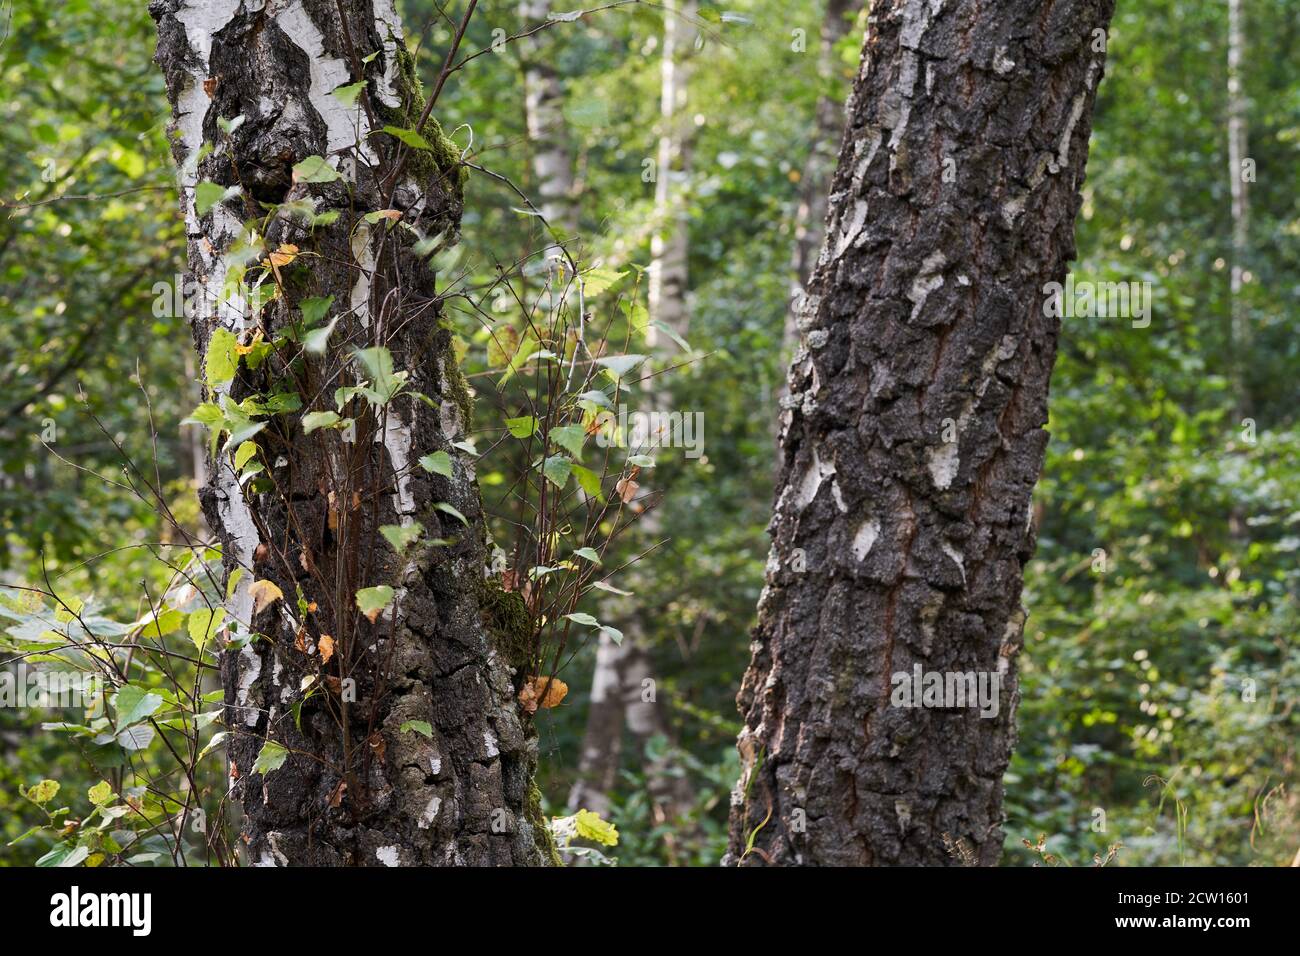 View of two birch trunks in a deciduous forest. In the background more birch trees. Stock Photo